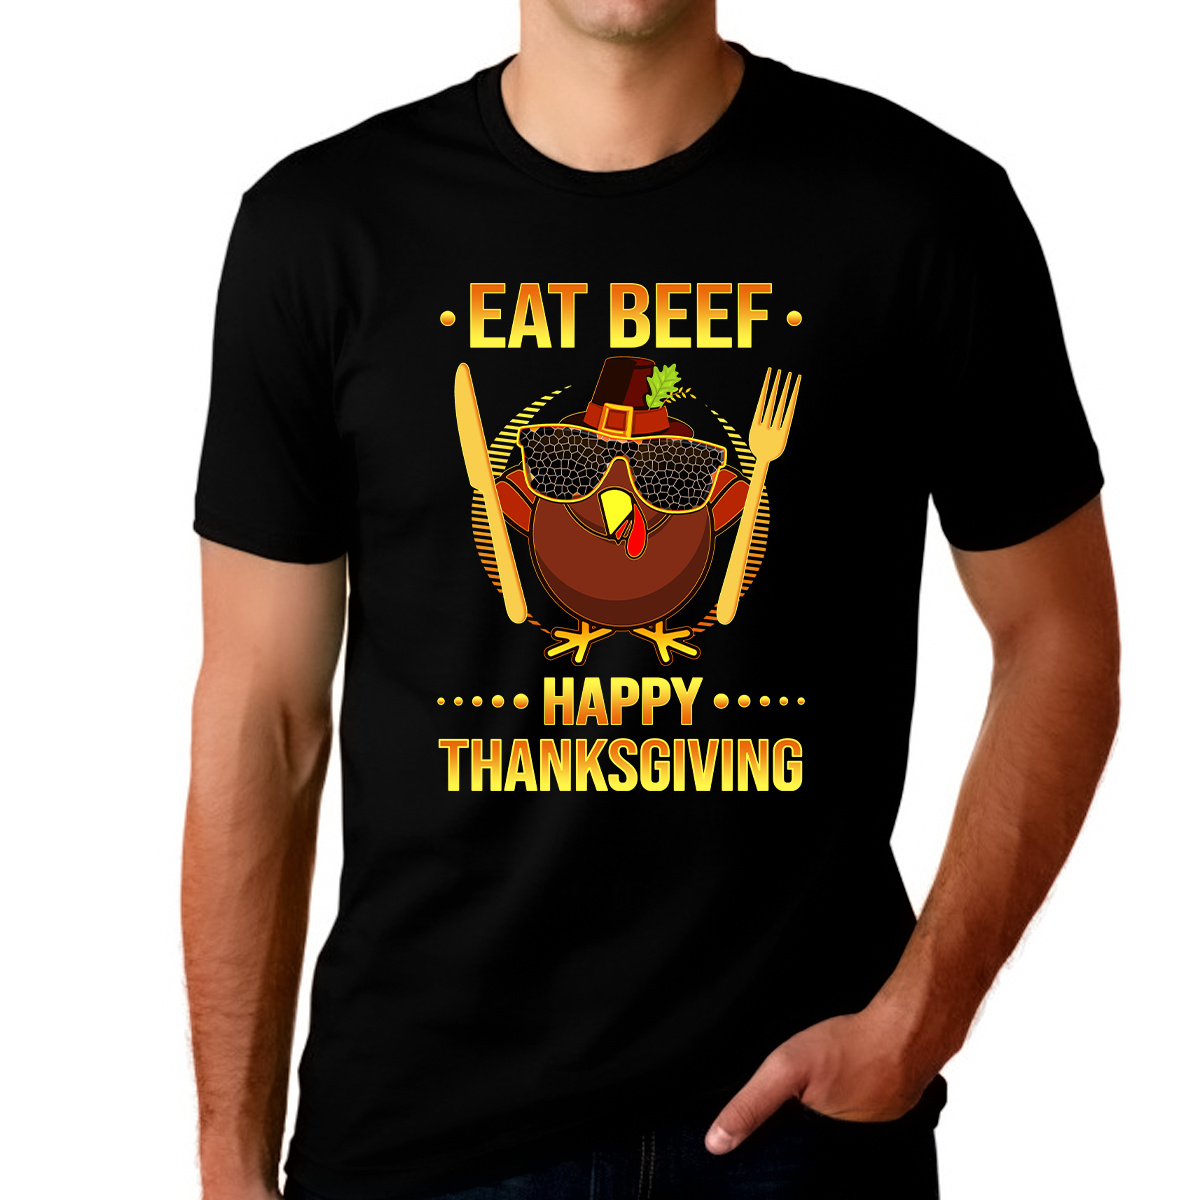 Funny Thanksgiving Shirts for Men Beef Shirt Thanksgiving Shirt Funny Turkey Shirt Fall Shirts